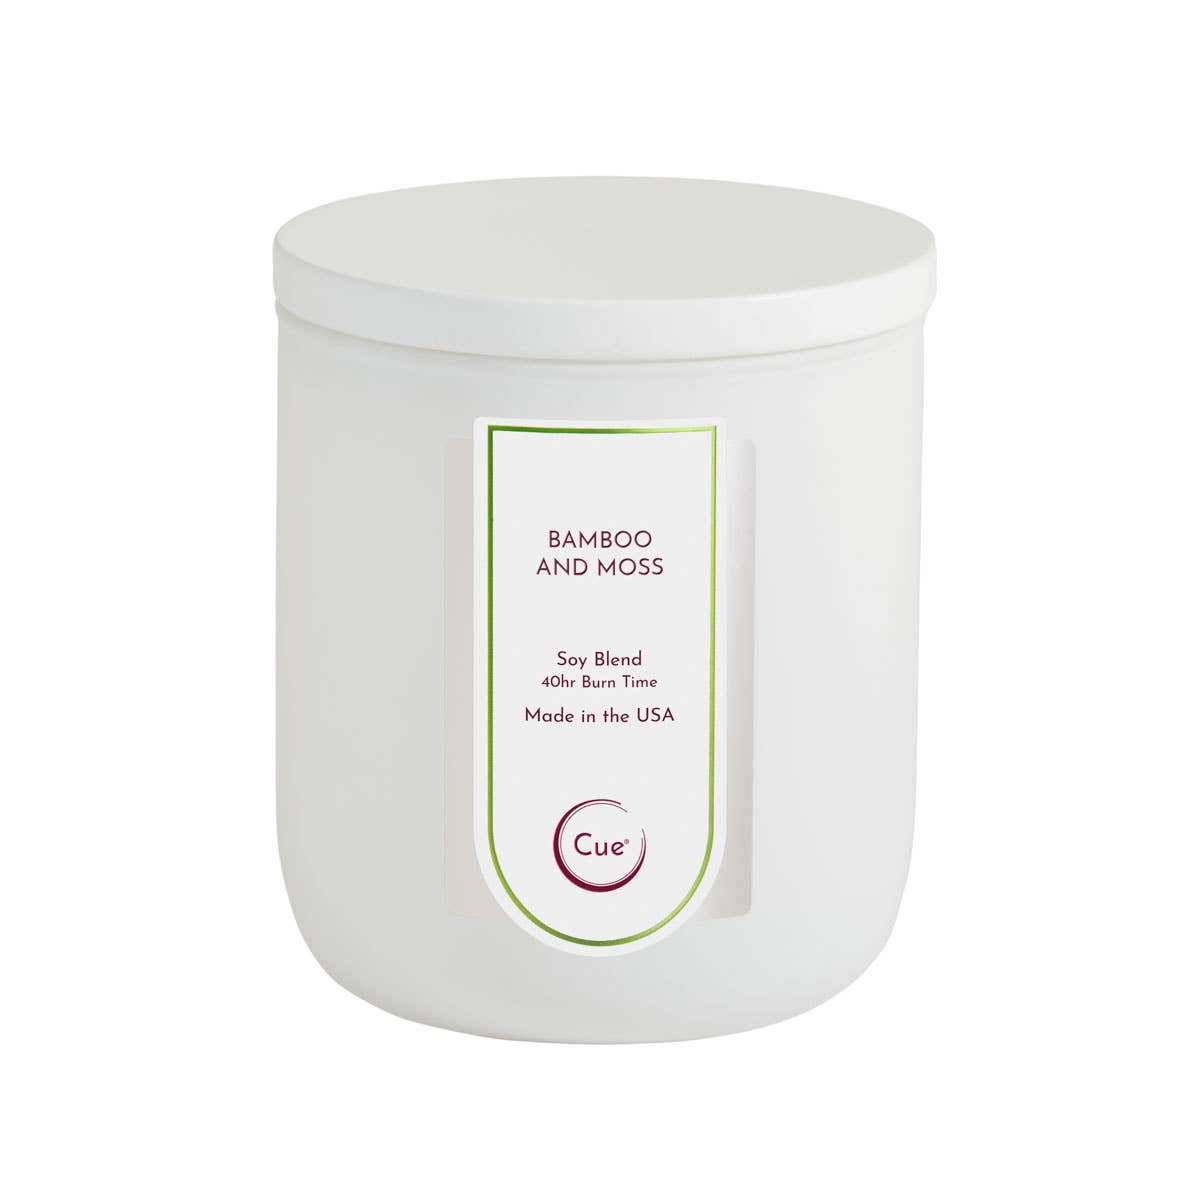 7.5oz | Bamboo and Moss Candle | Soy Blend Wax | Vegan